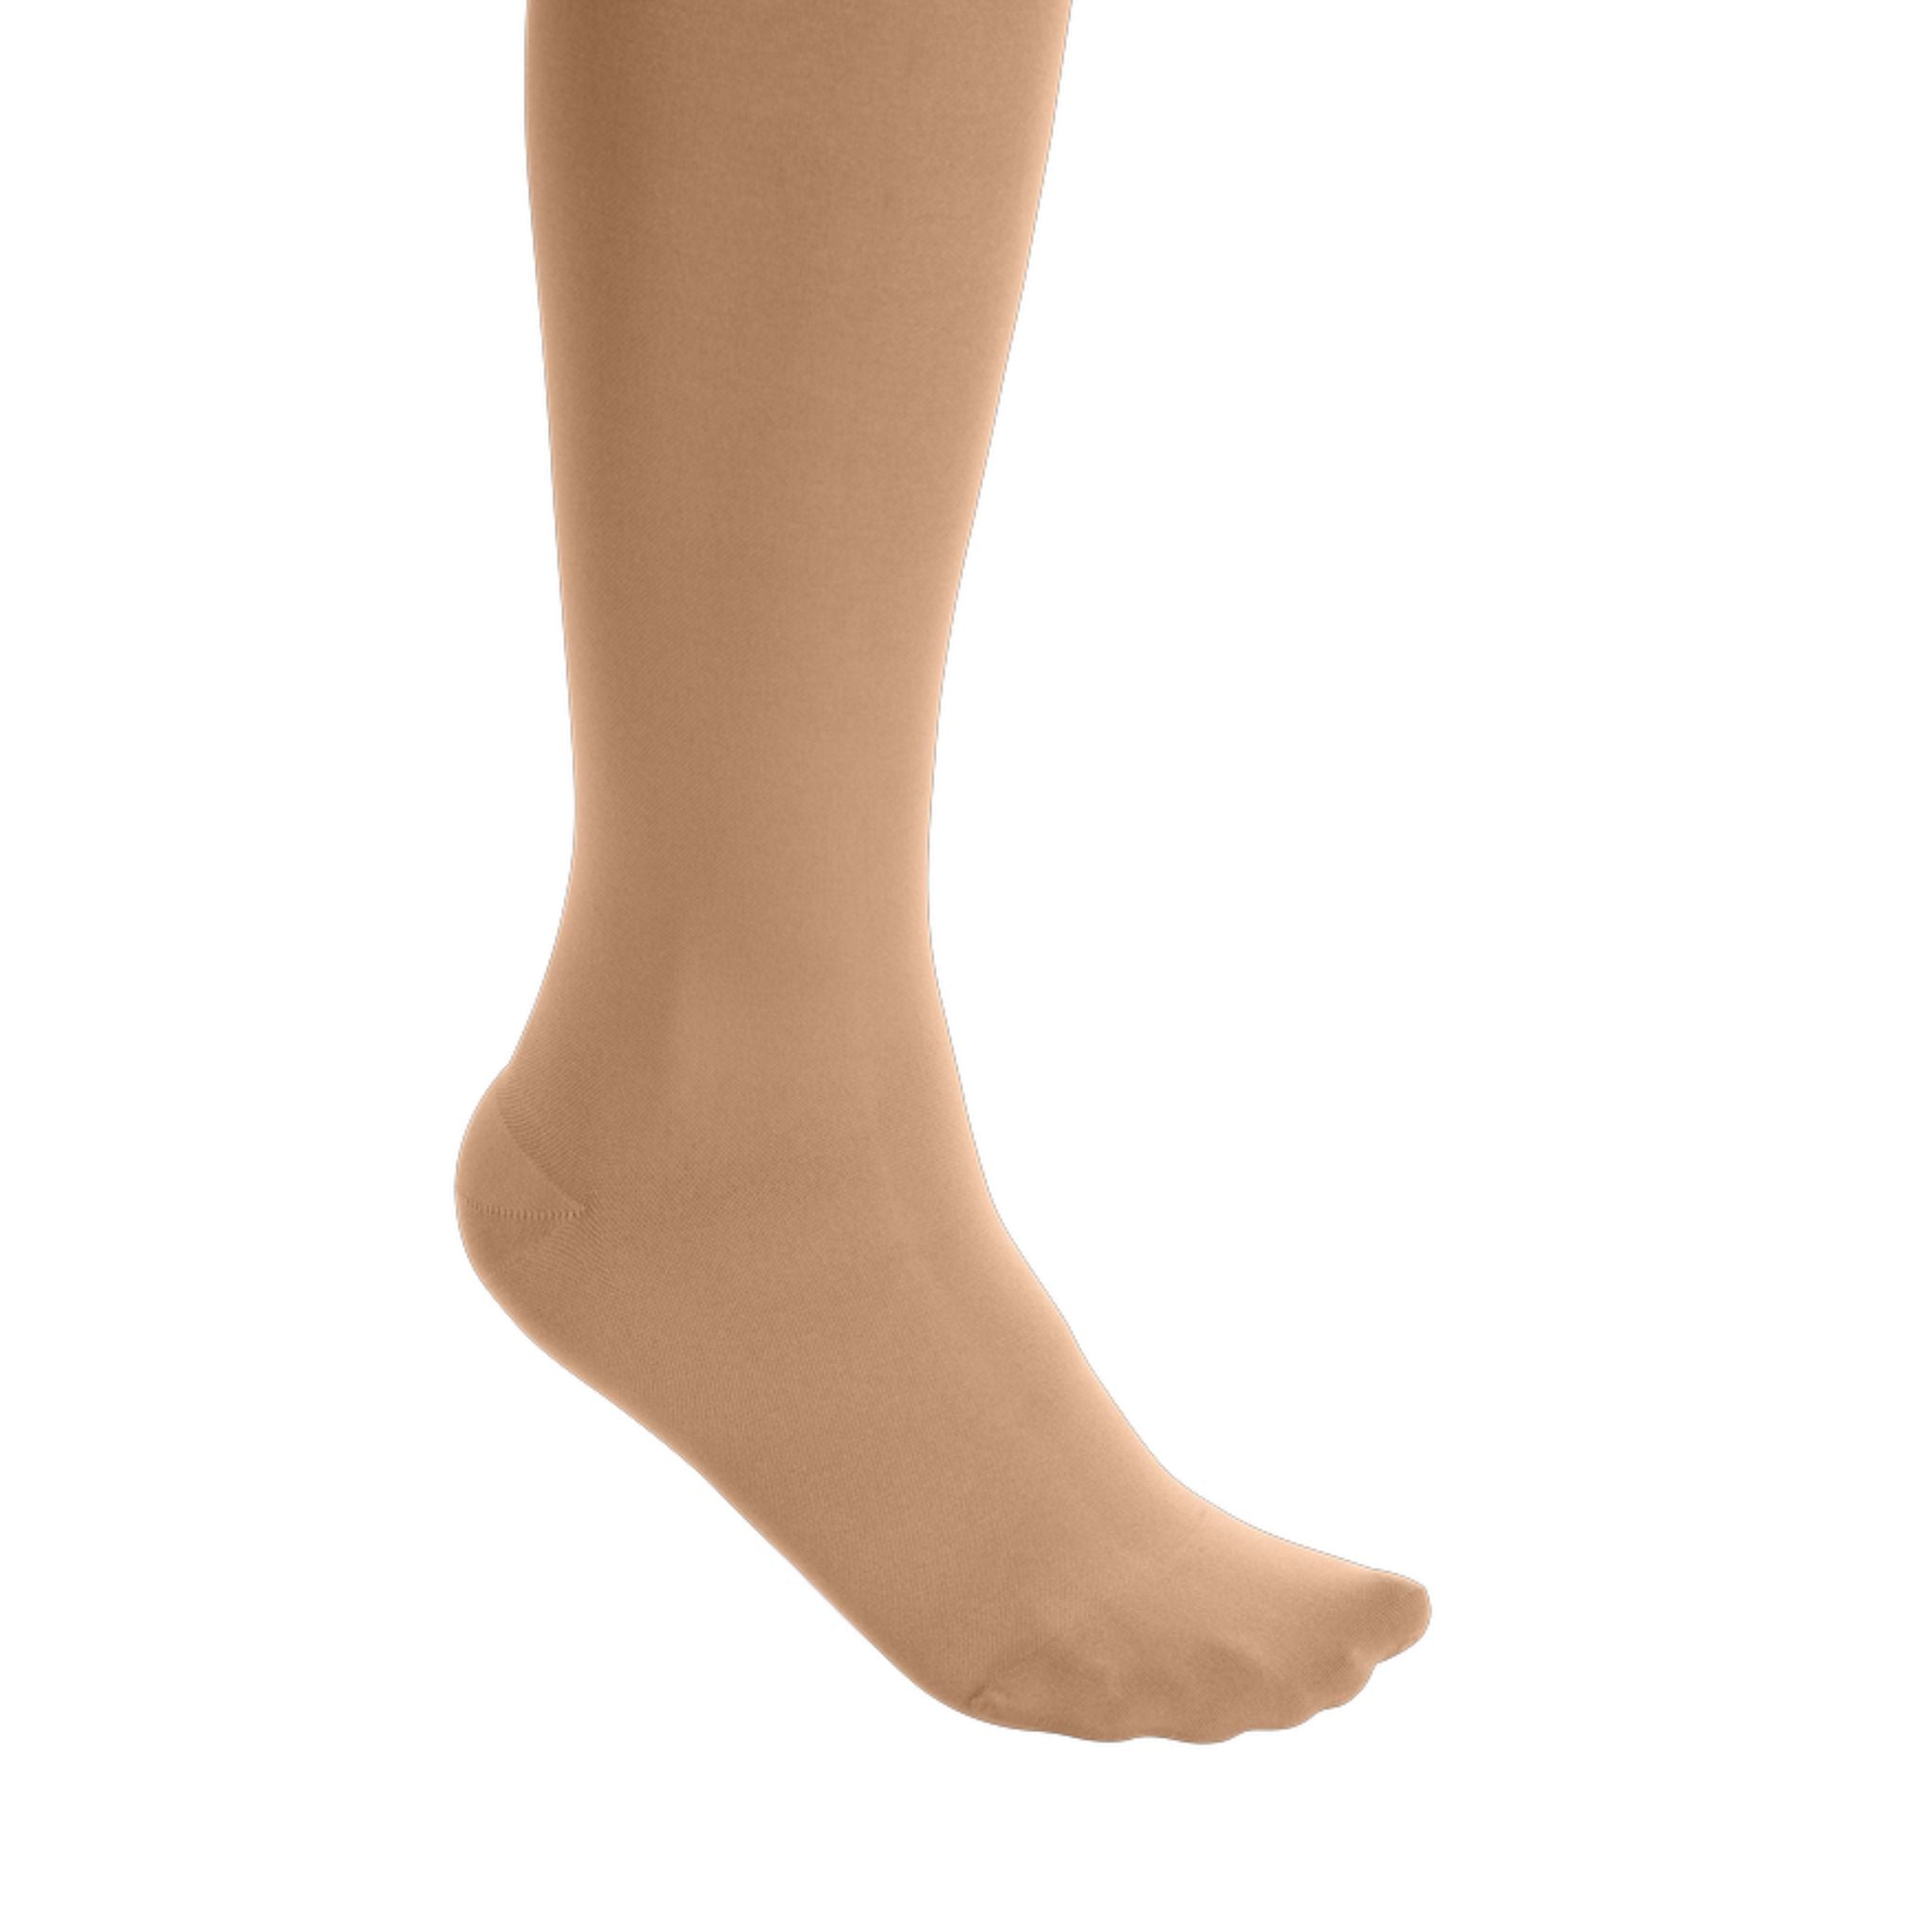 Buy Mediven Elegance Class 1 Thigh Length Compression Stockings Online